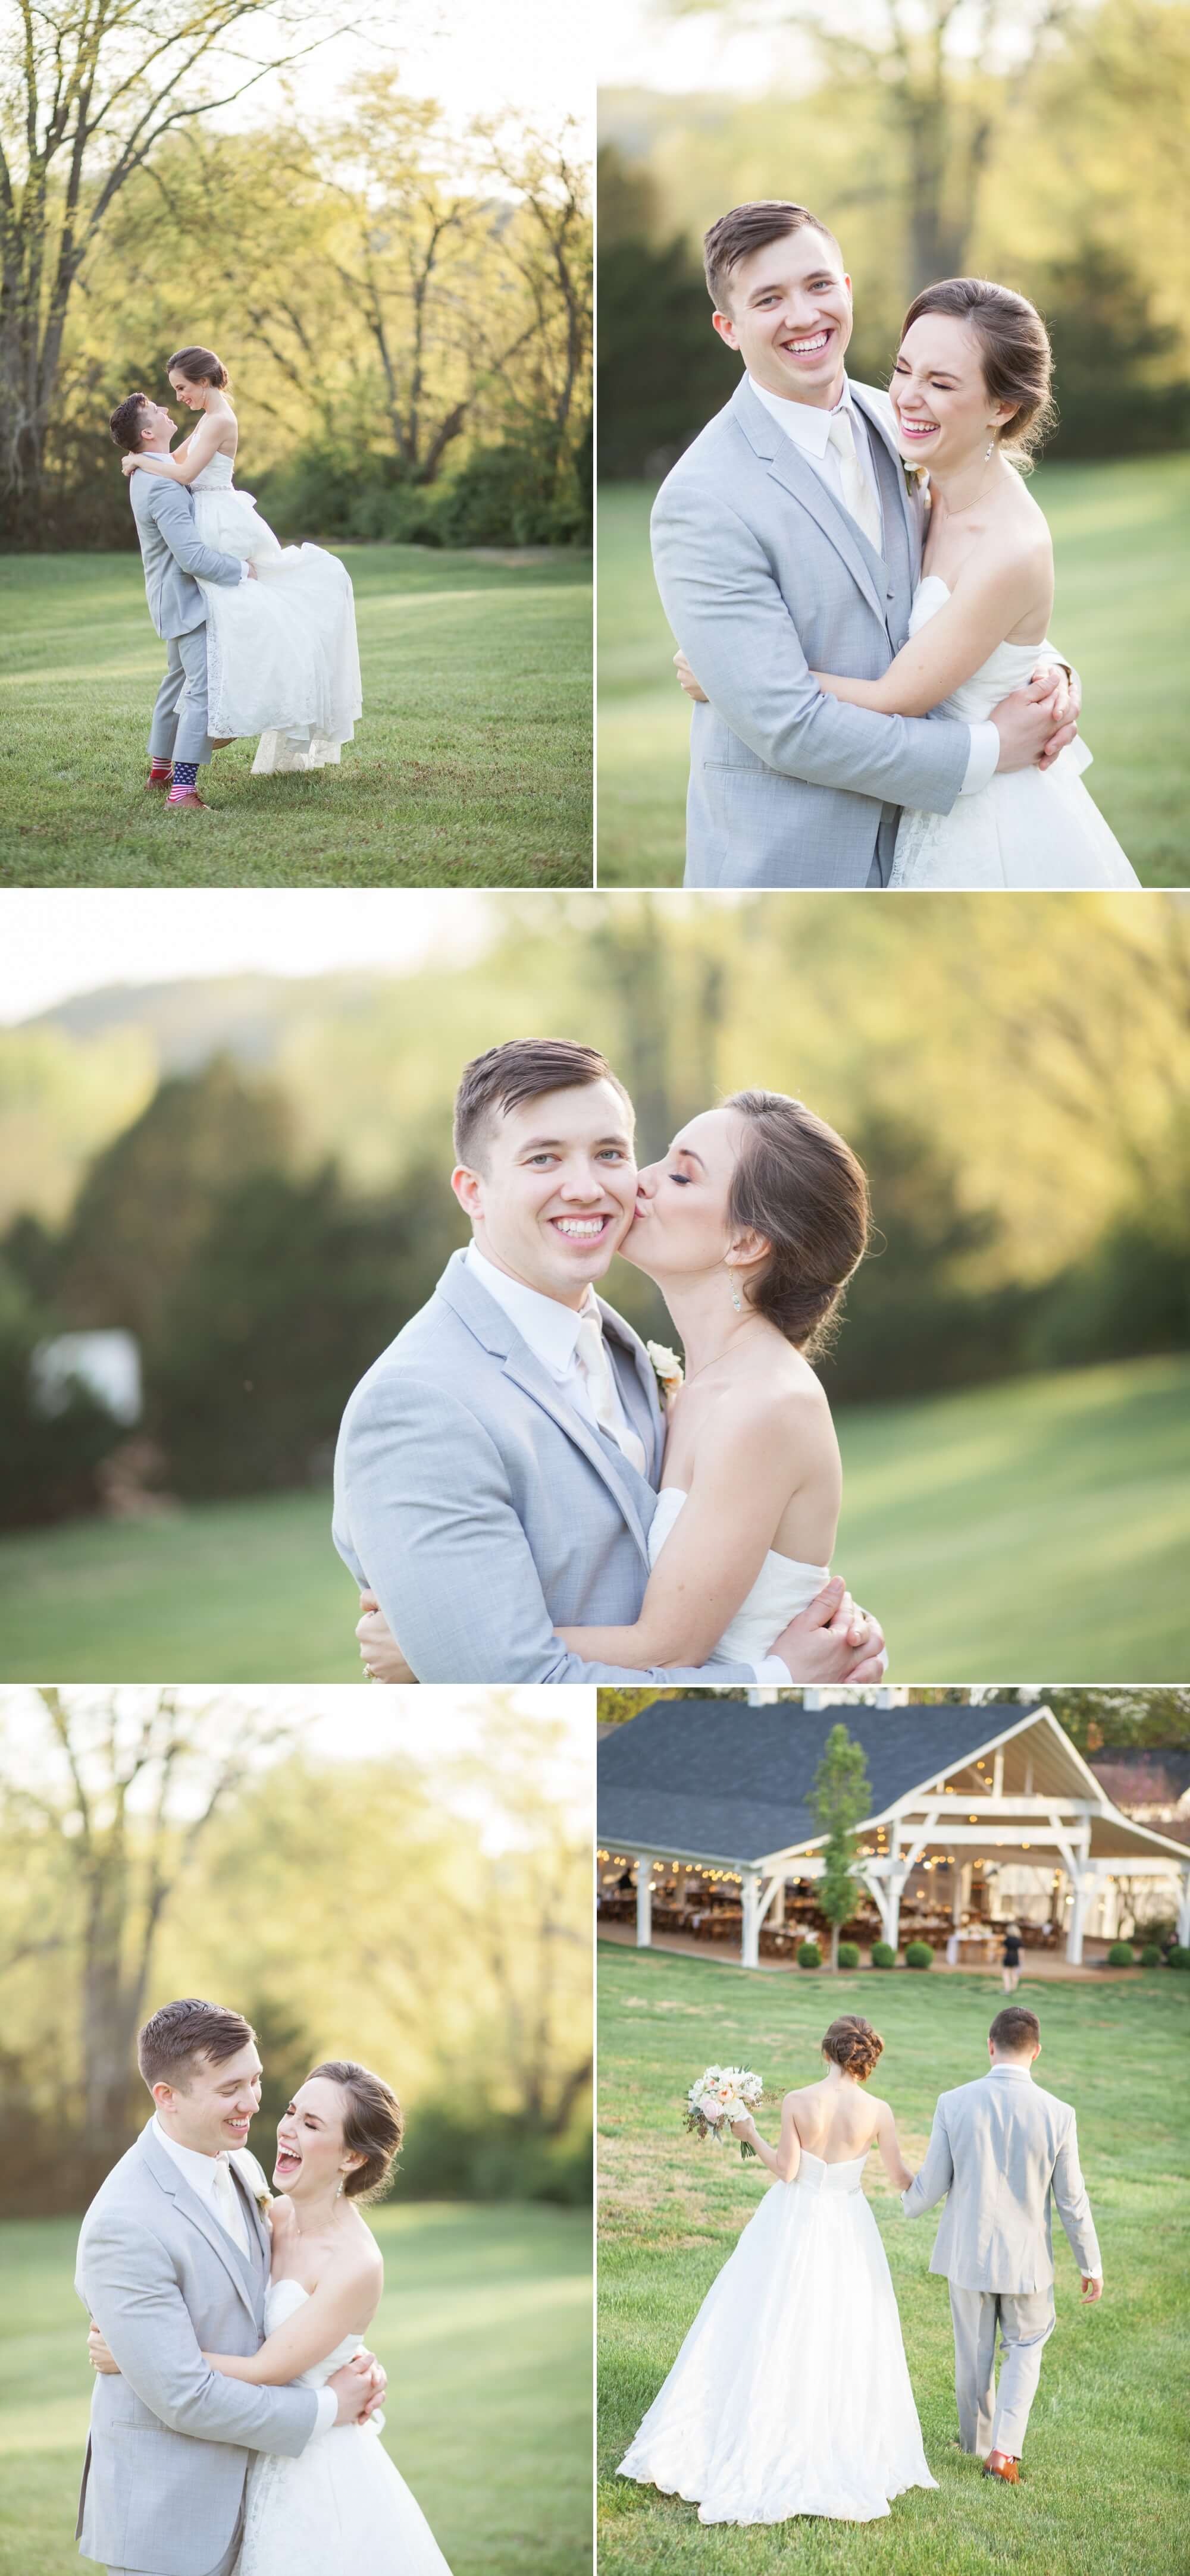 Bride and groom portraits at sunset in meadow after ceremony. Spring wedding at Cedarwood Weddings in Nashville, TN. Photo by Krista Lee Photography, from Sam and Izzy's wedding day.